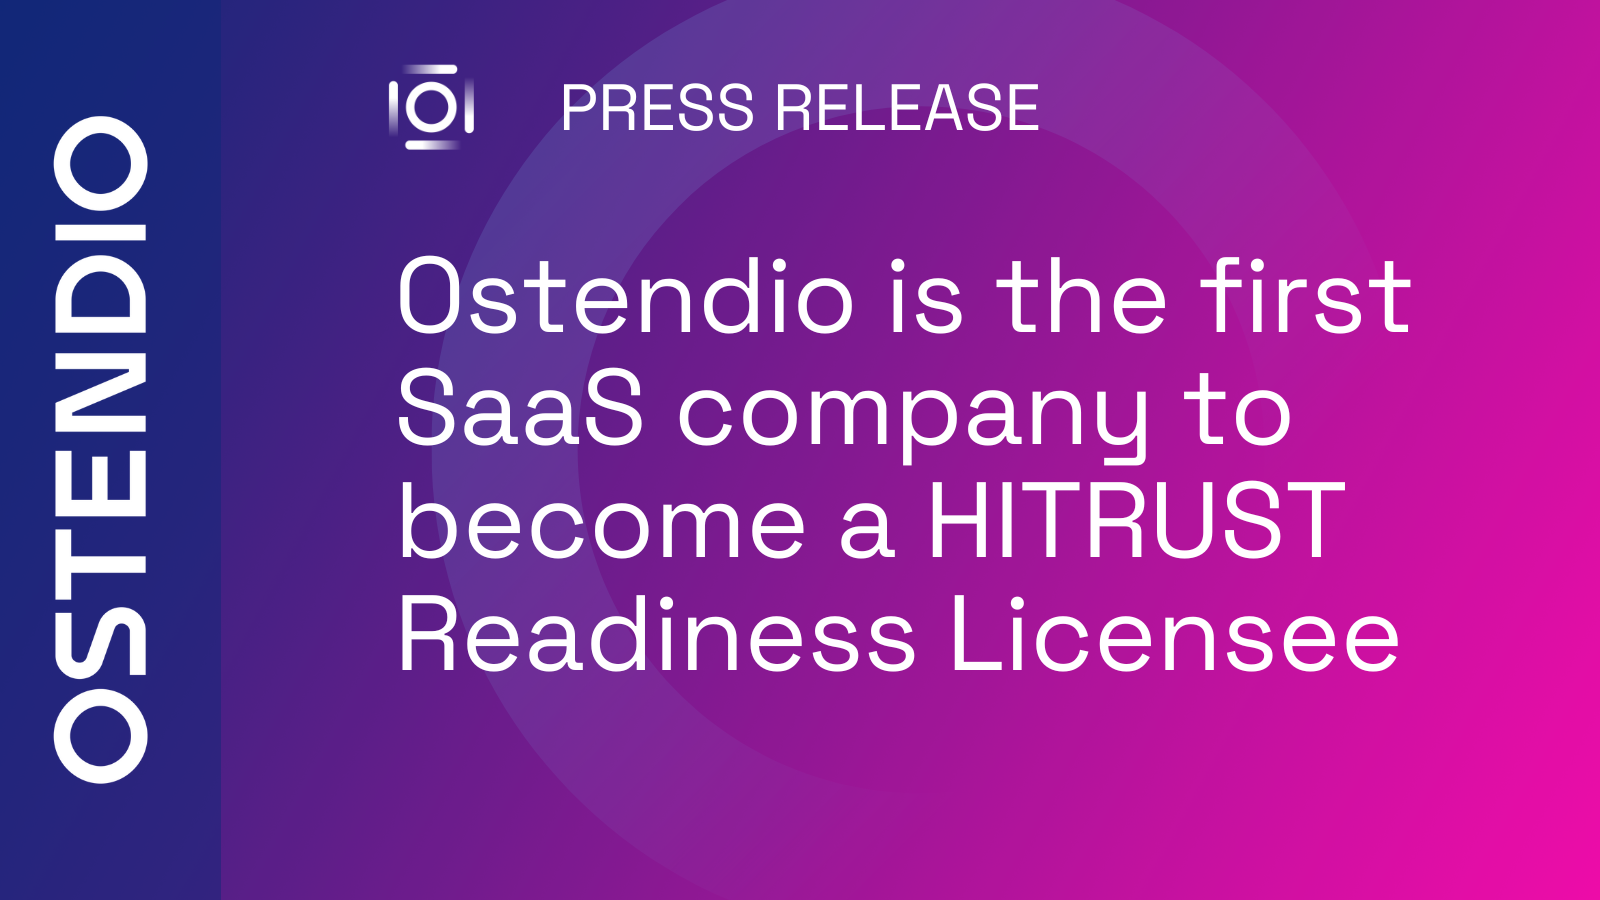 Ostendio is first SaaS company to become a HITRUST Readiness licensee